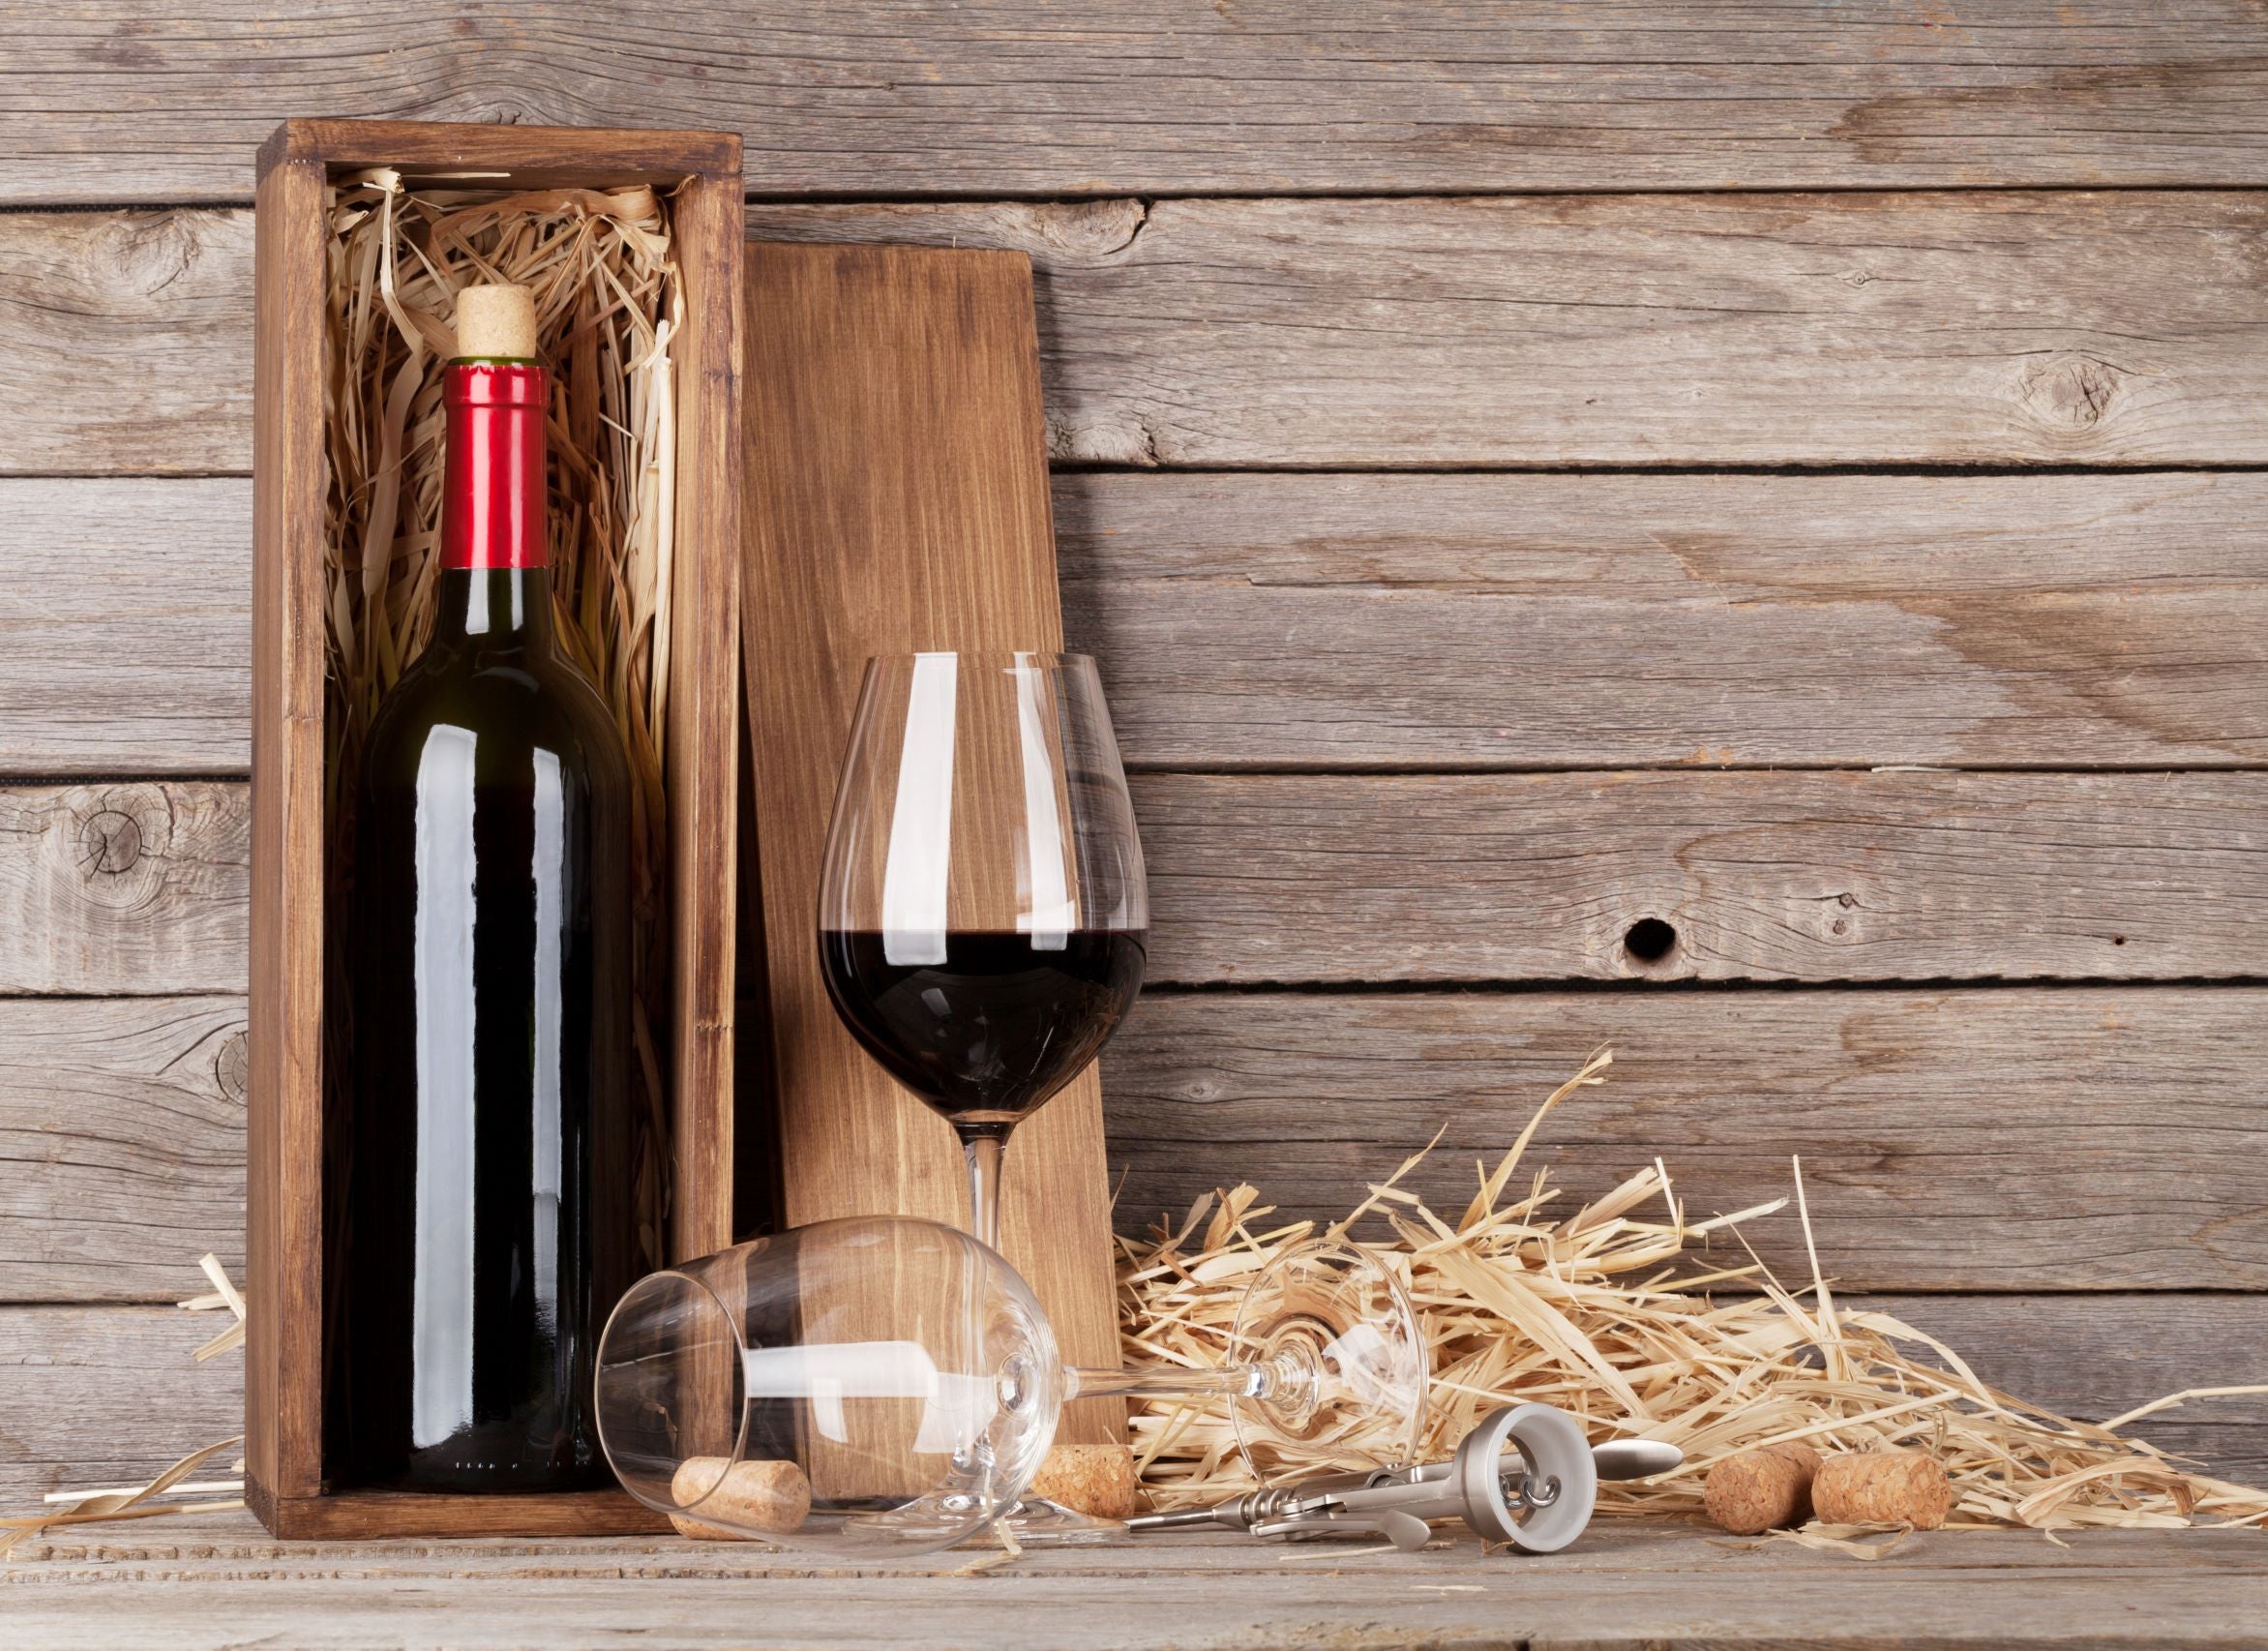 Wine bottle in a DIY wooden box next to a glass of wine.